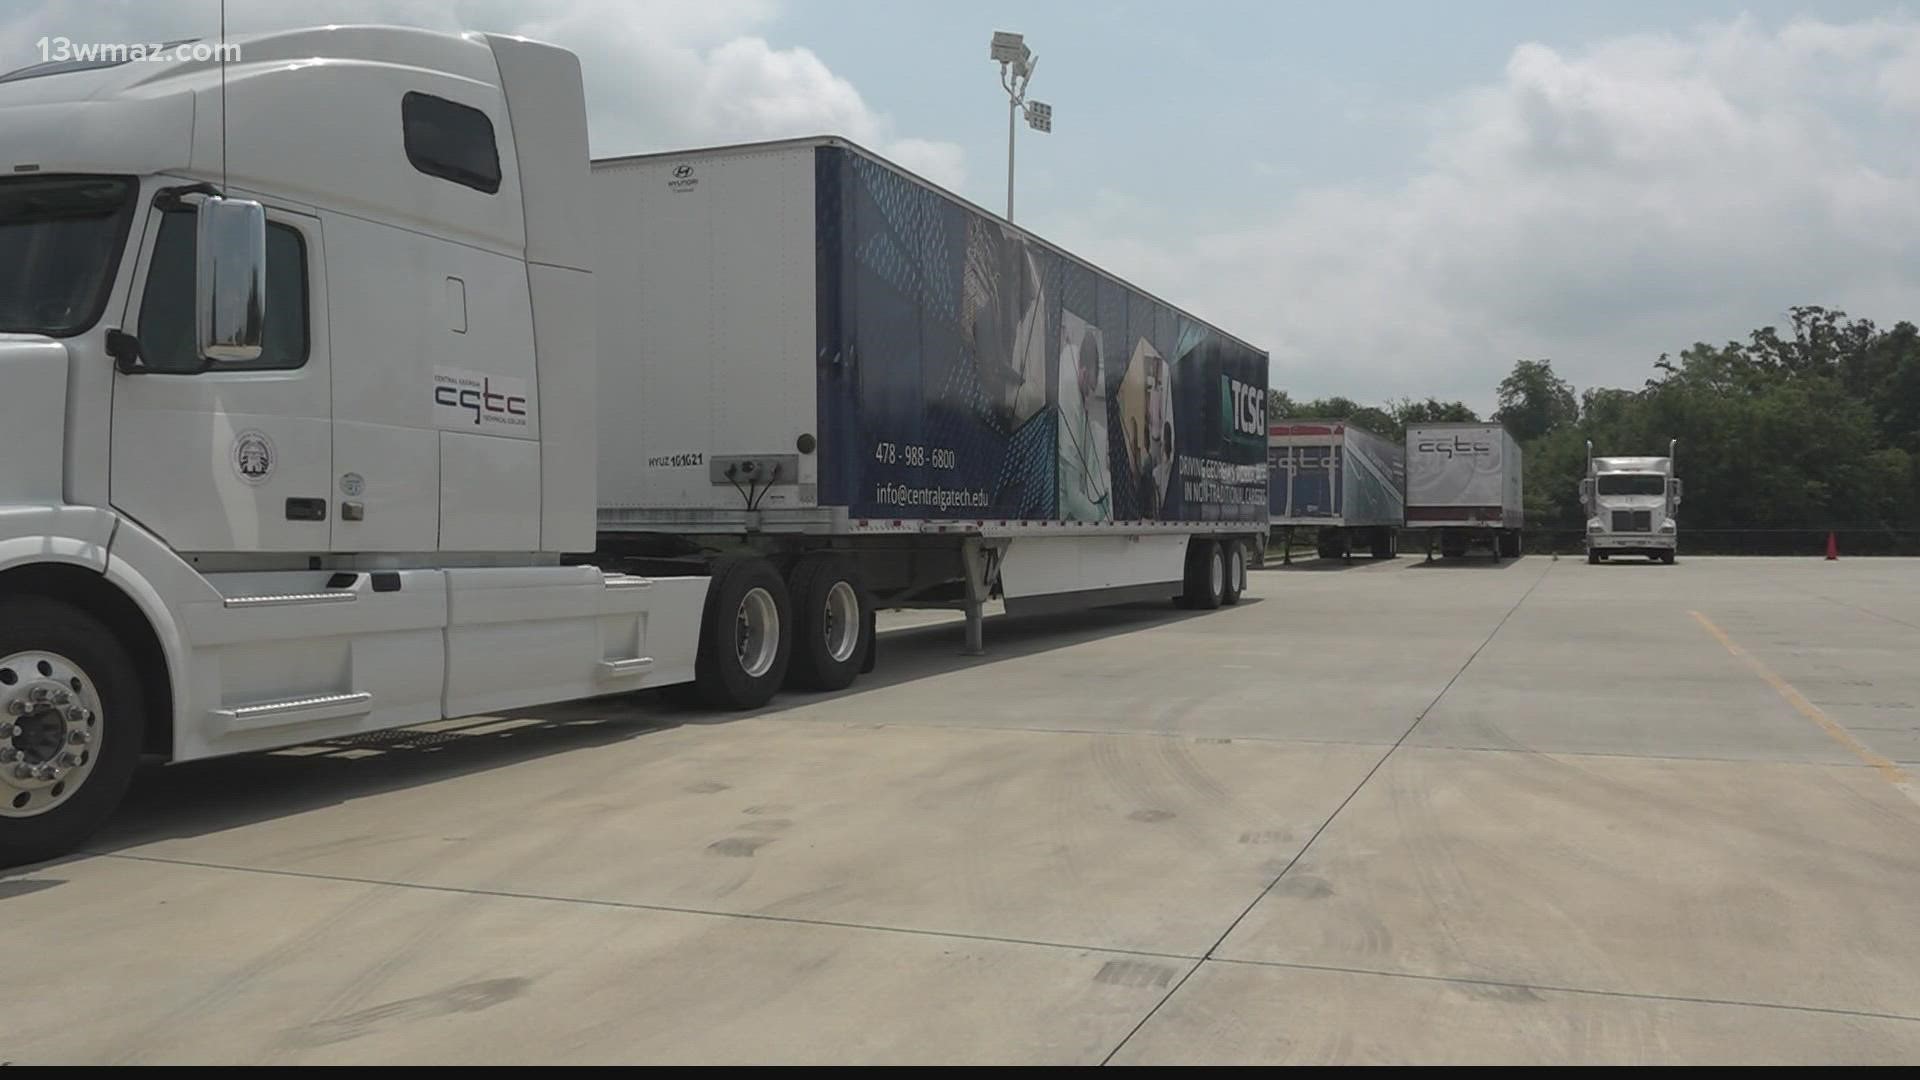 Coca-Cola Company gave $1 million to the Technical College System of Georgia to hire more truck driving instructors.